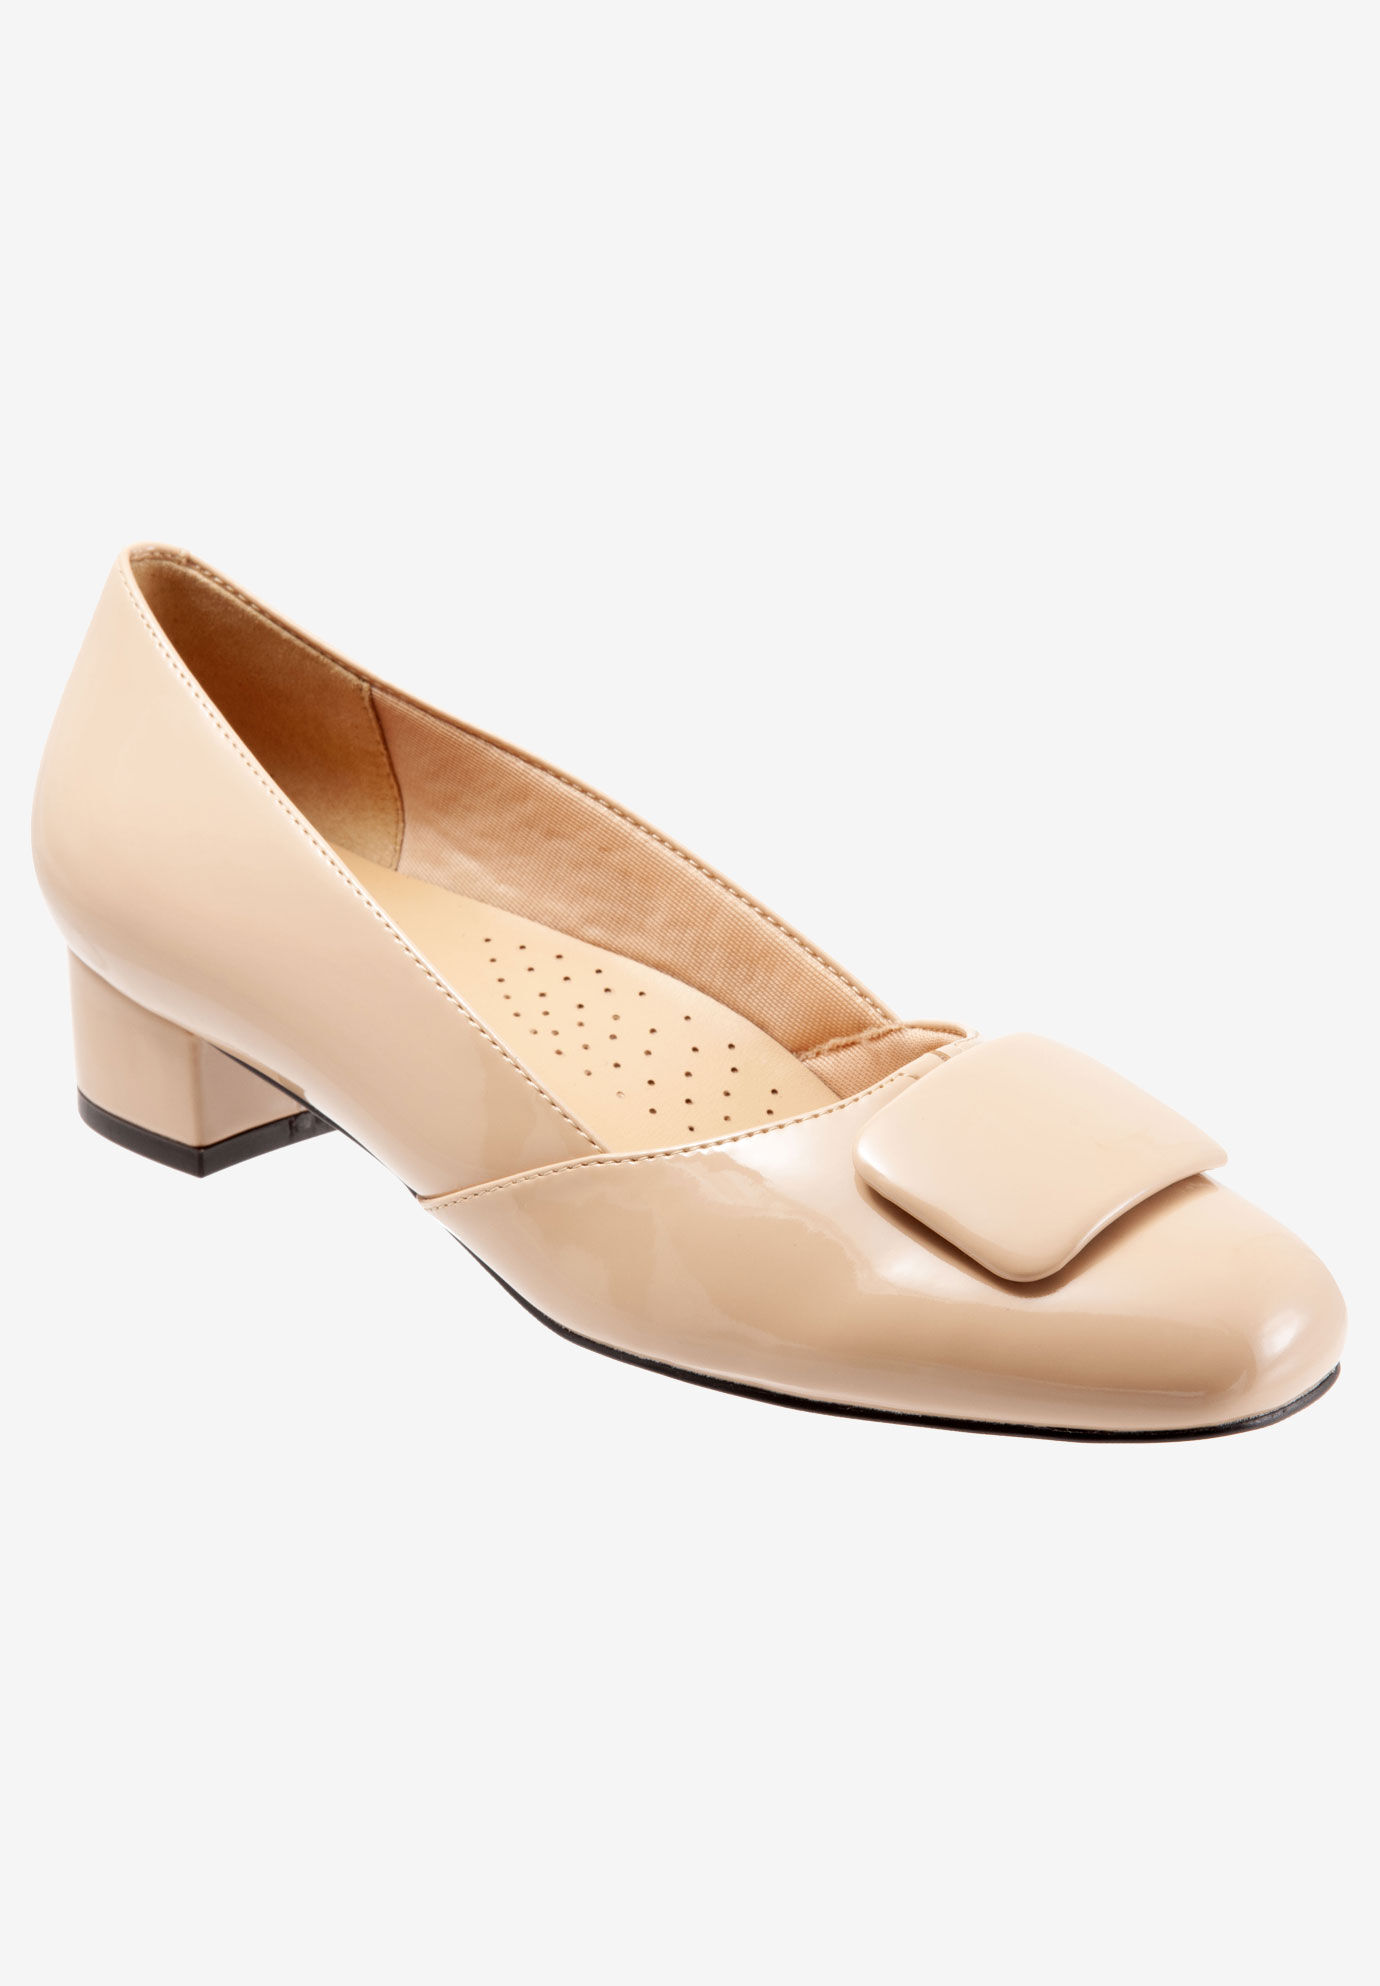 Extra Wide Width Women's Delse Pump by Trotters in Nude Patent (Size 10 1/2 WW)